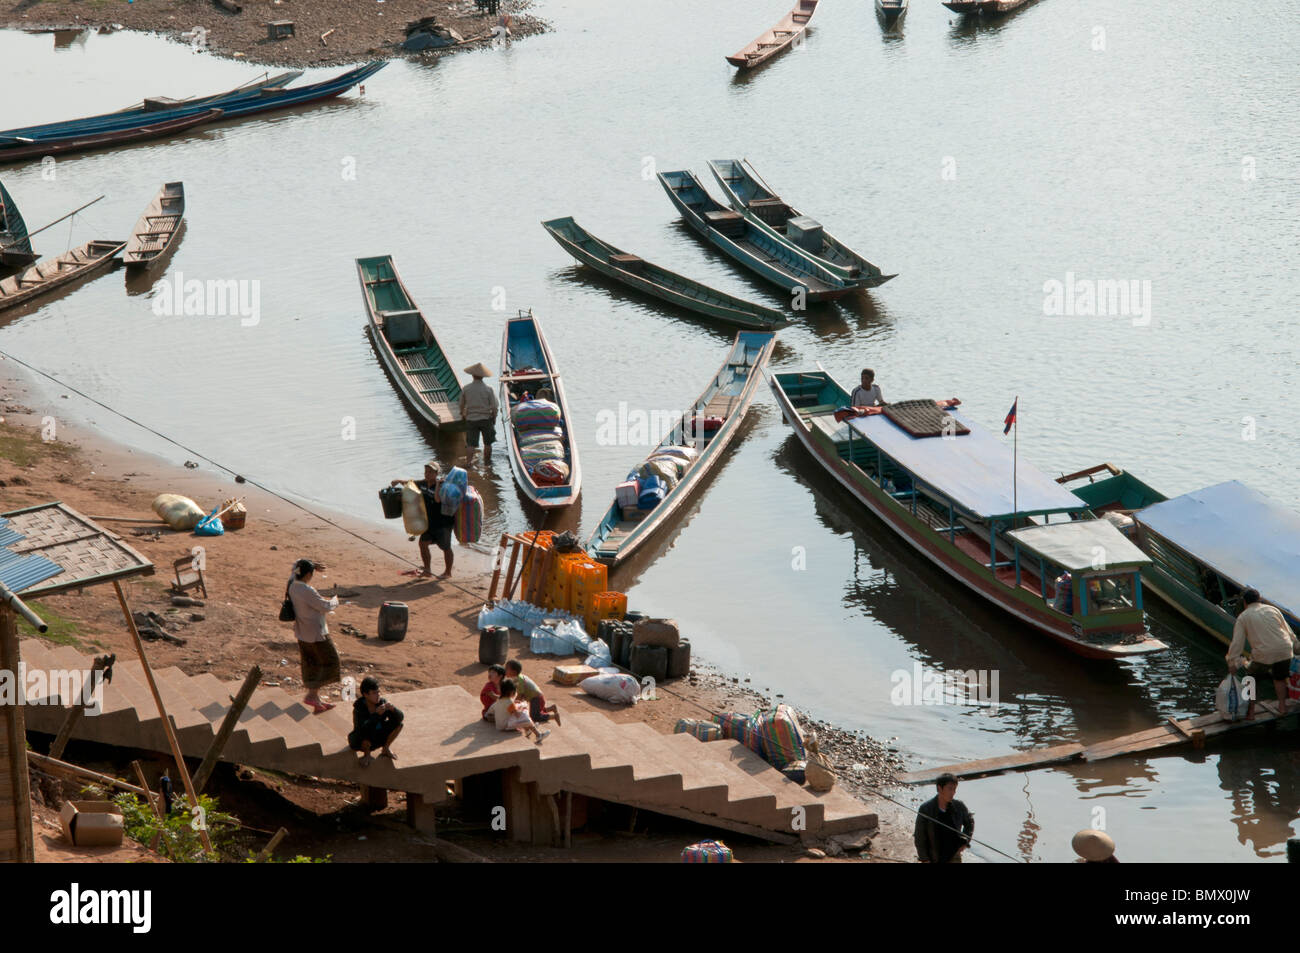 Goods being offloaded at Muang Ngoi in Northern Laos Stock Photo